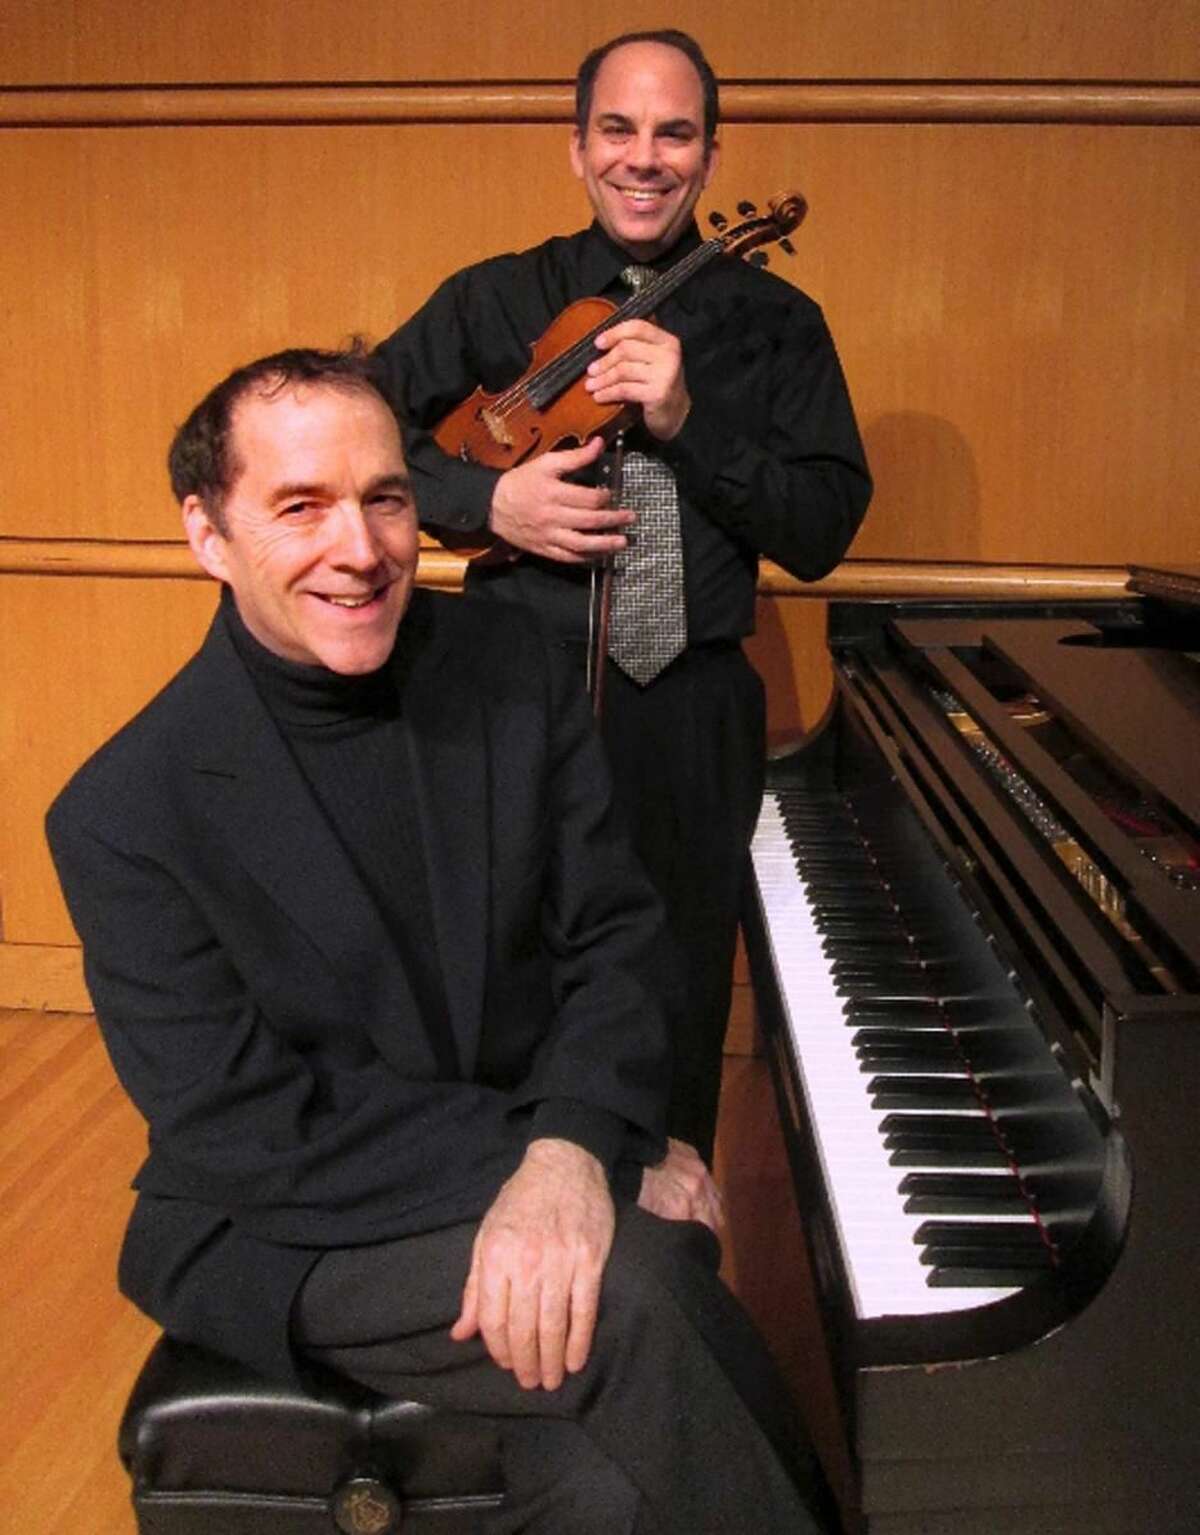 The Auerbach-Pierce Duo will play Mozart, Brahms and more for a concert at Saint Michael’s in Litchfield.